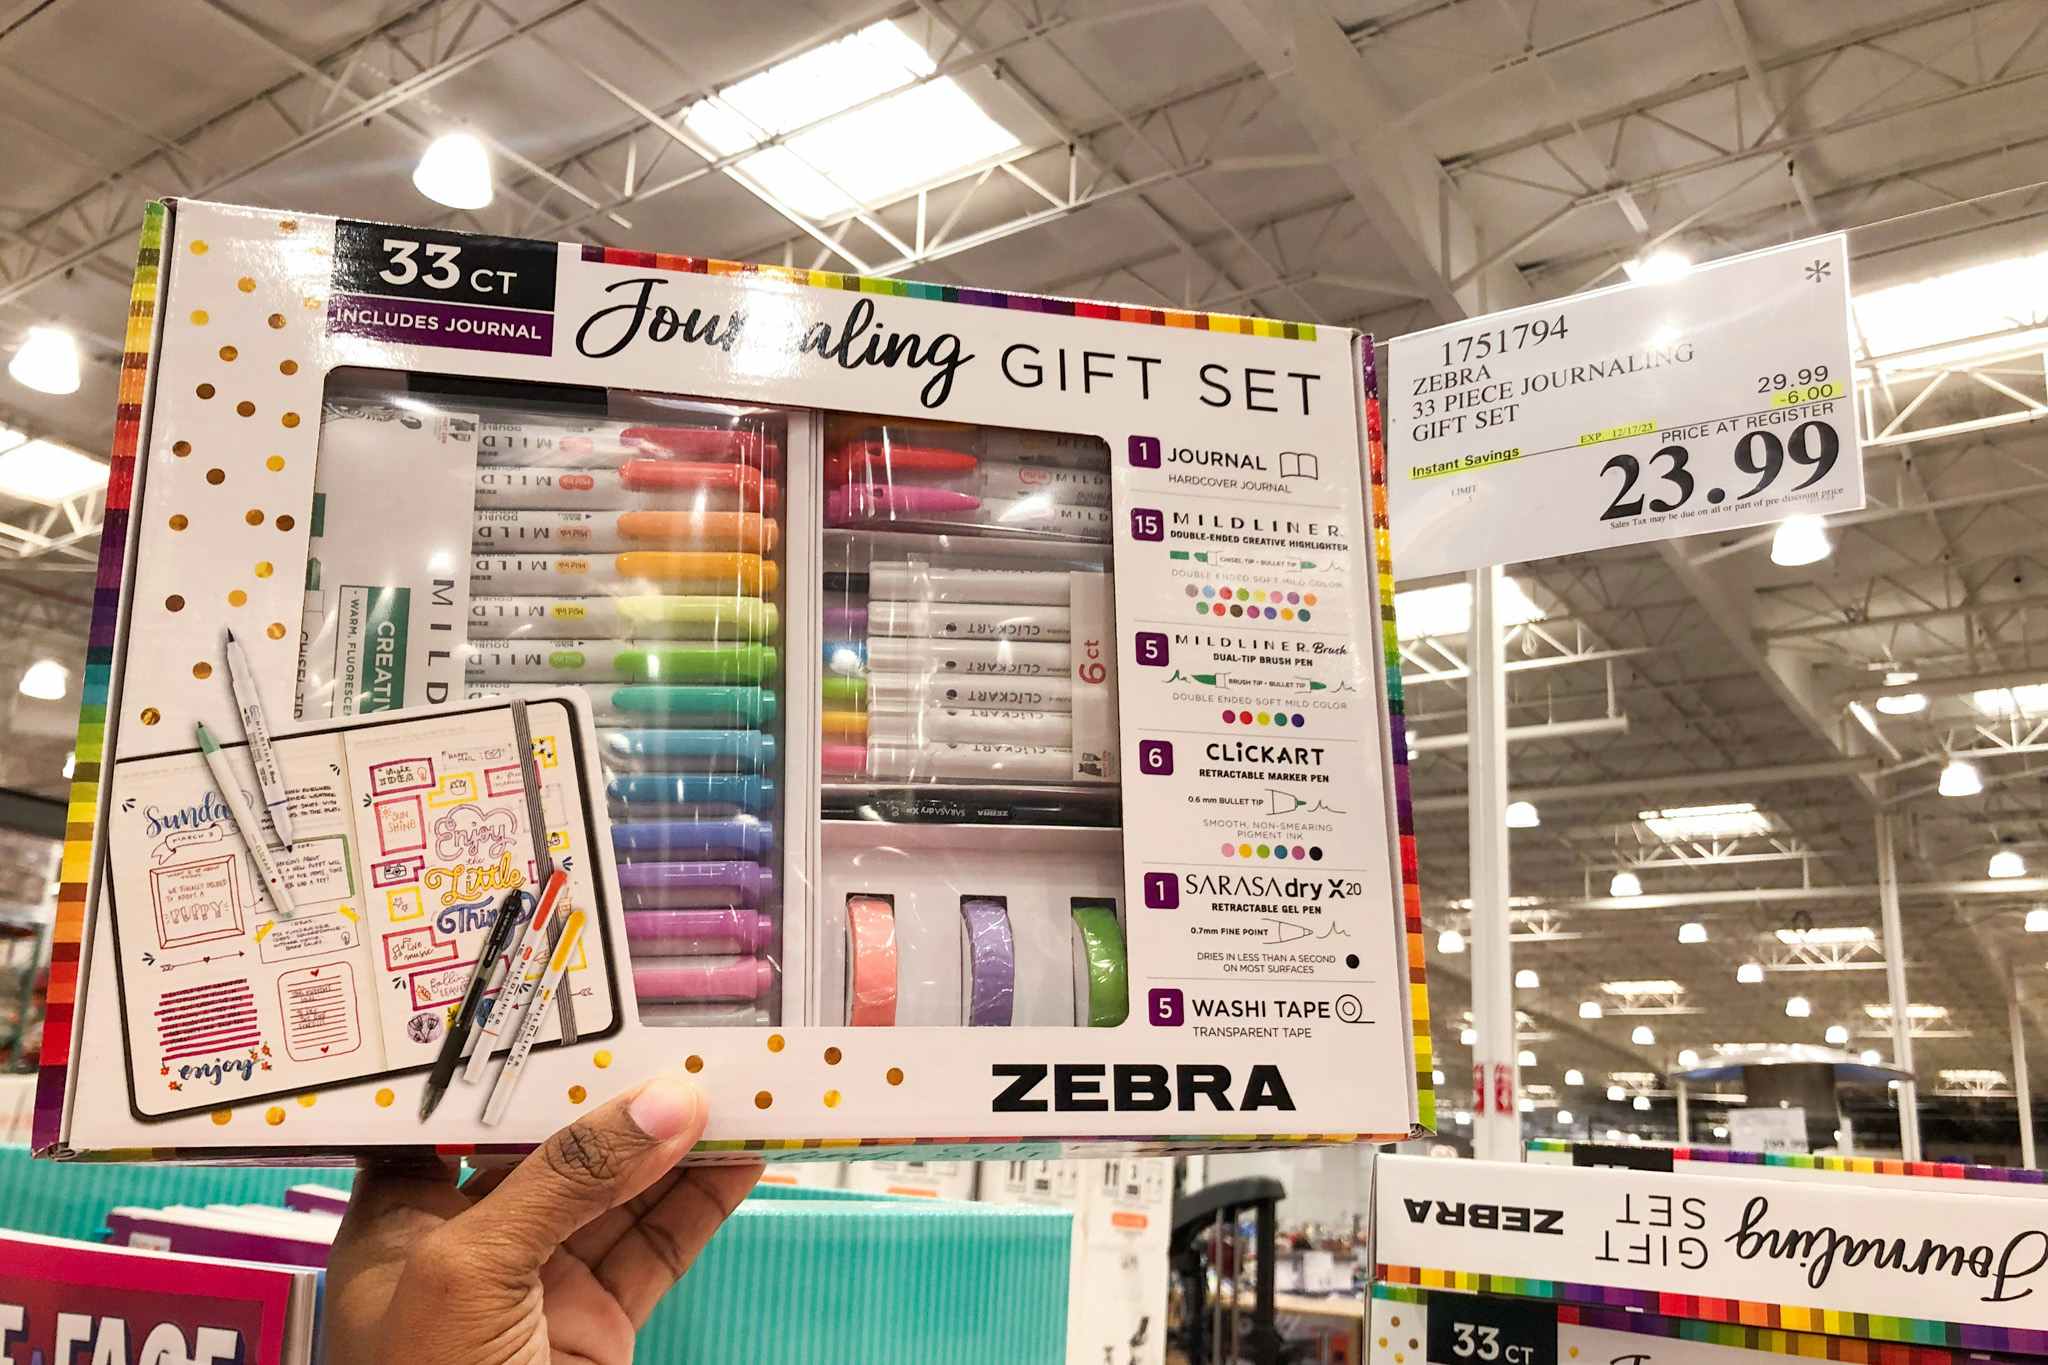 Costco Aisles  Costco Finds on Instagram: New Journaling Gift Set  (33-Piece) from Zebra at Costco. The set includes (1) hardcover journal,  (15) Midliner Marker, (5) Midliner Brush Pen, (6) Clickart Marker